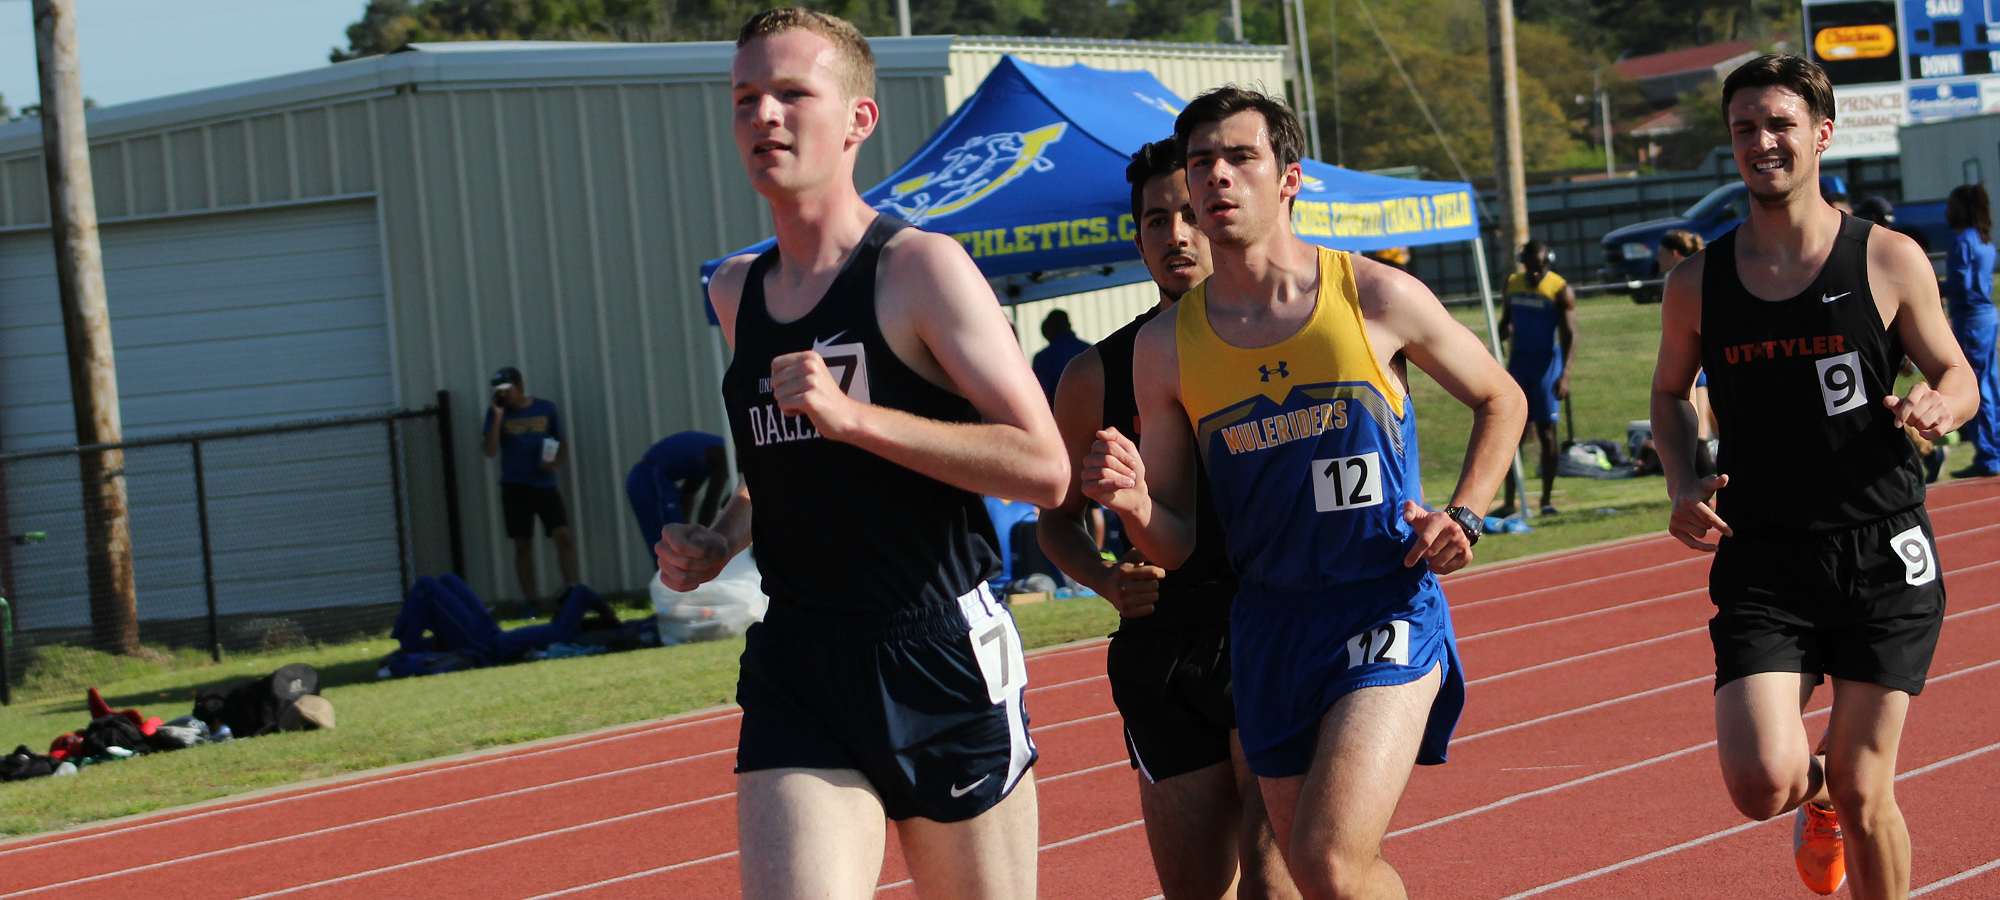 Crusaders competed in last meet before conference in two weeks.